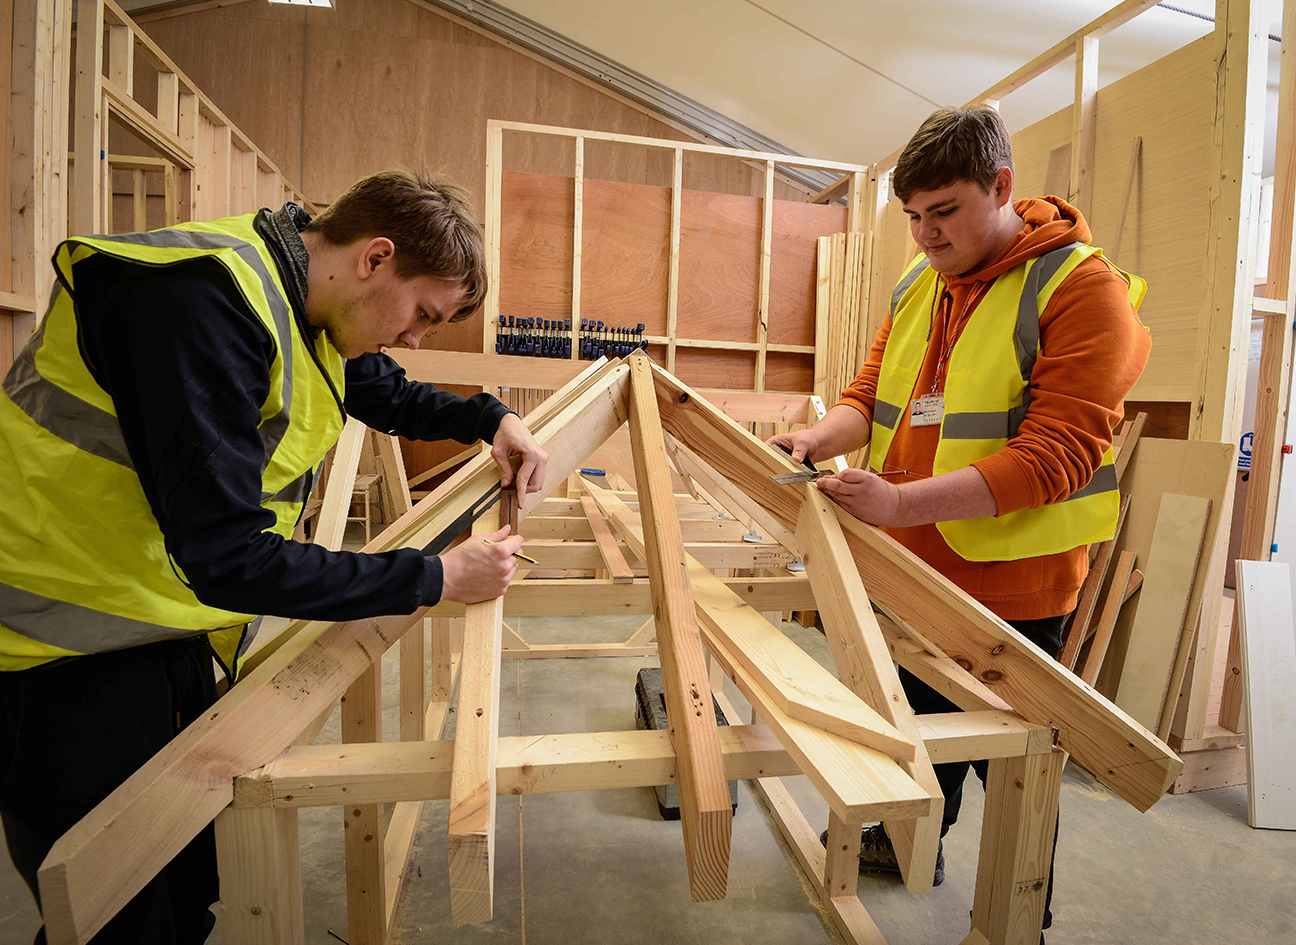 Carpentry students